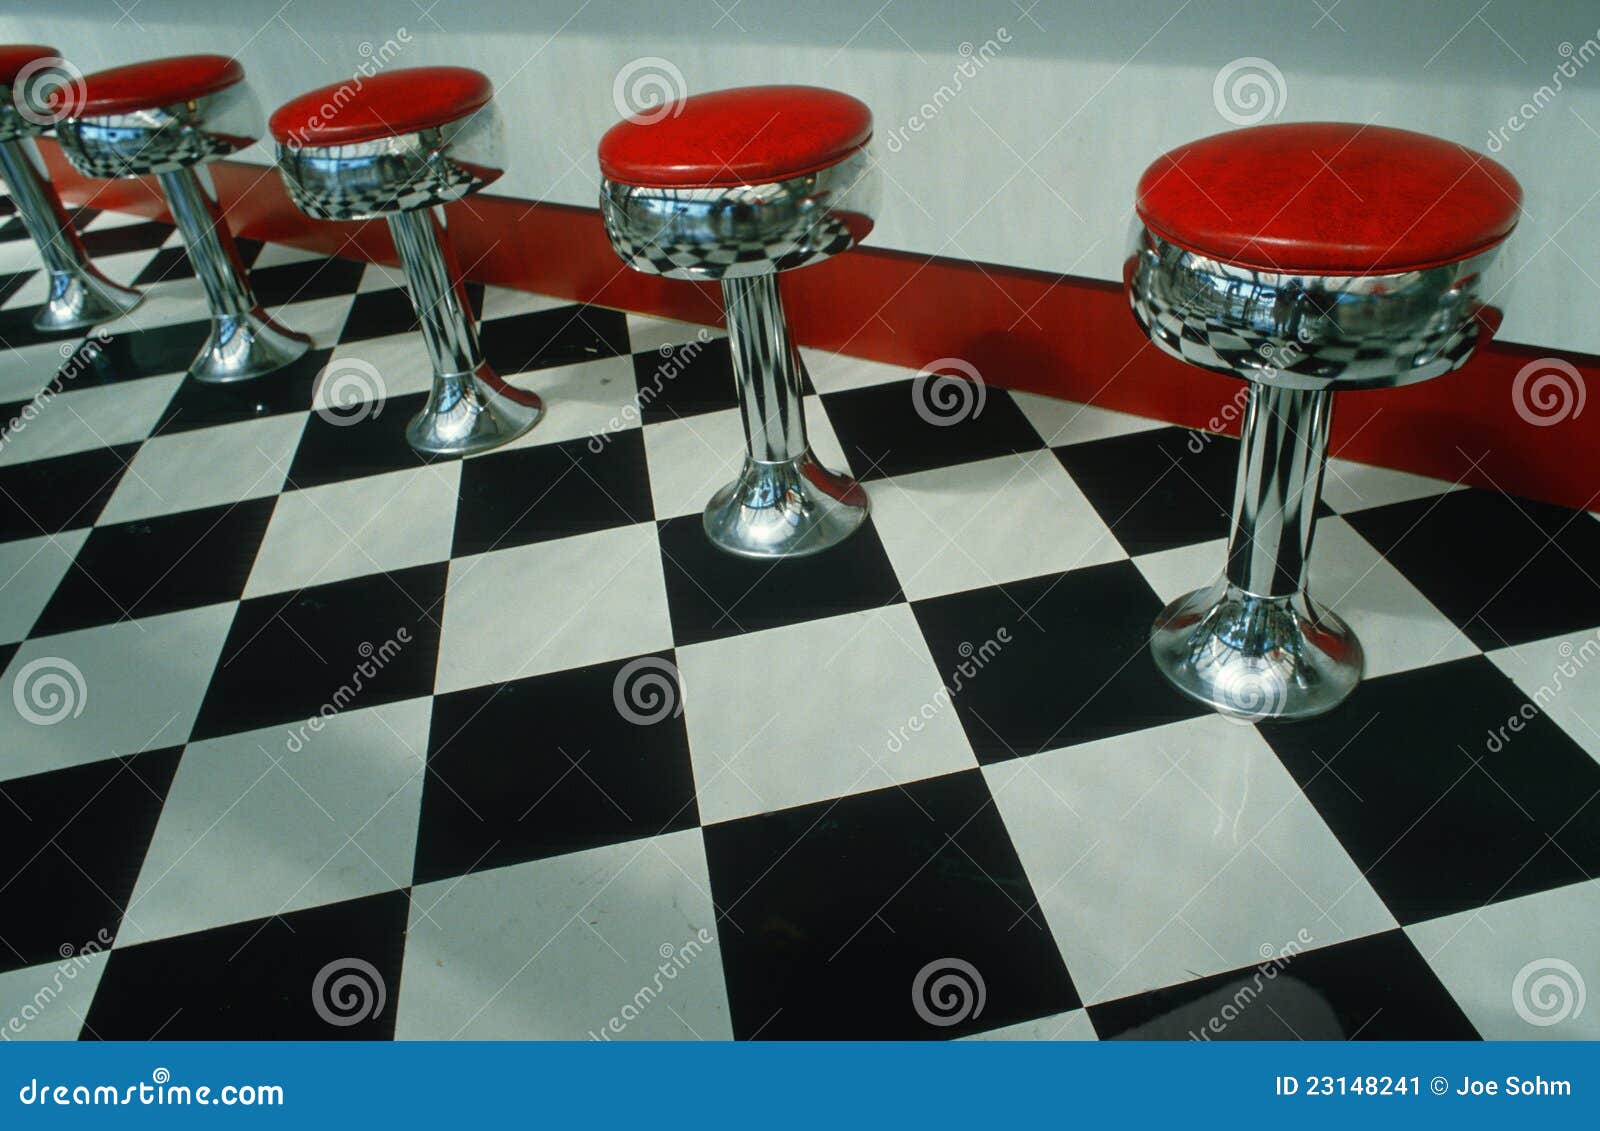 bar stools and checkered floor in diner